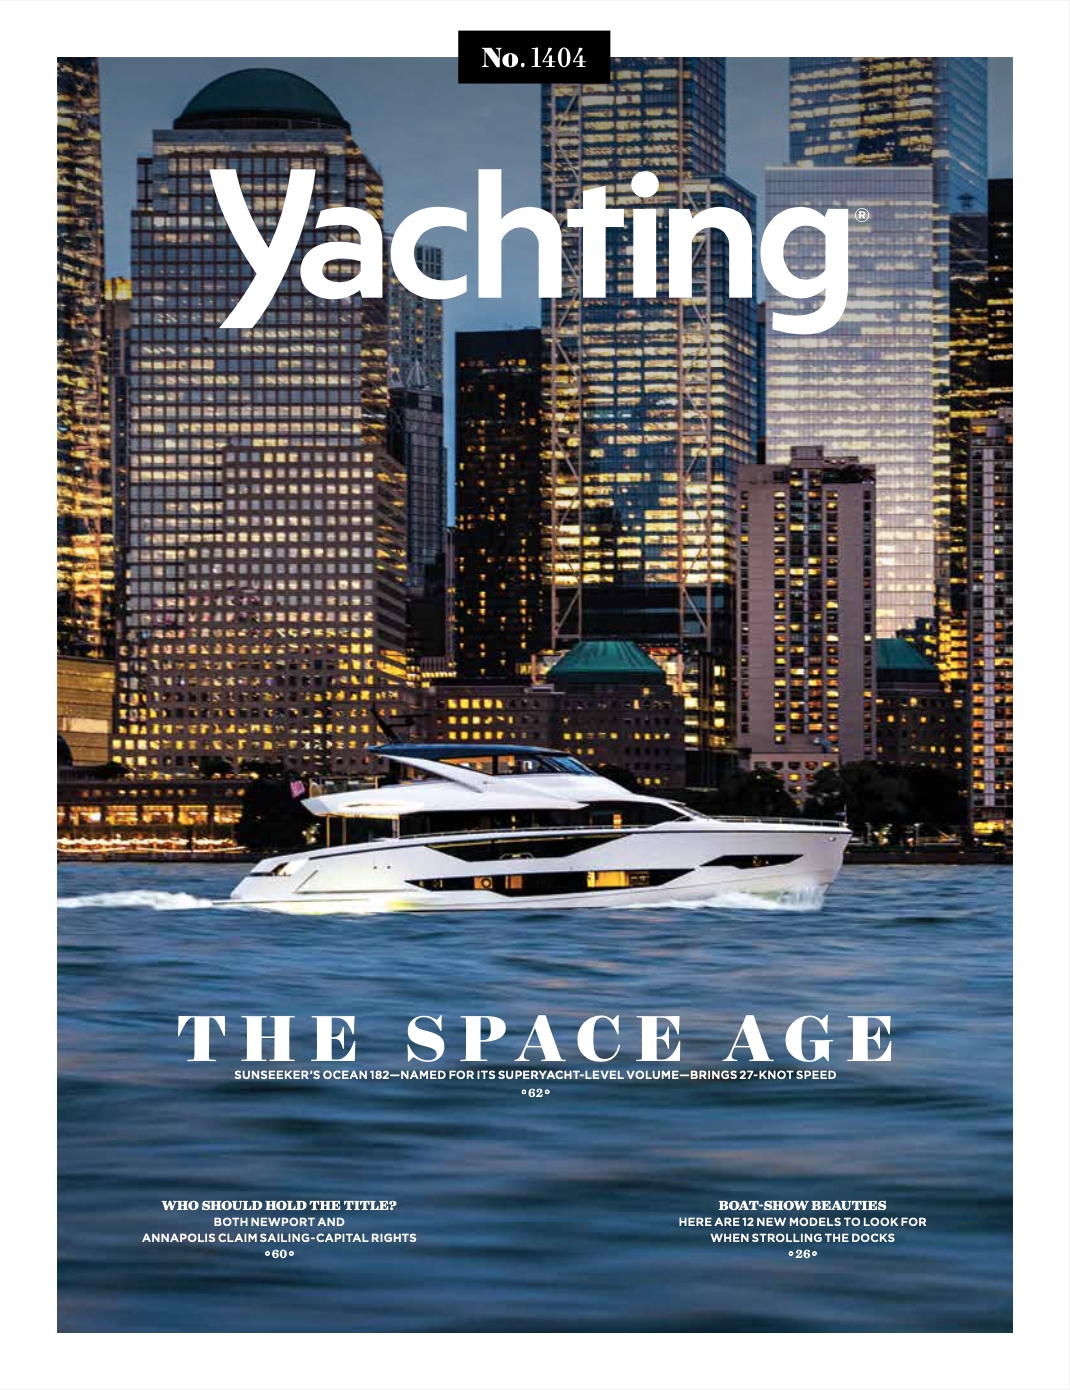 Embark on a Luxurious Sea Adventure with Yachting Magazine!